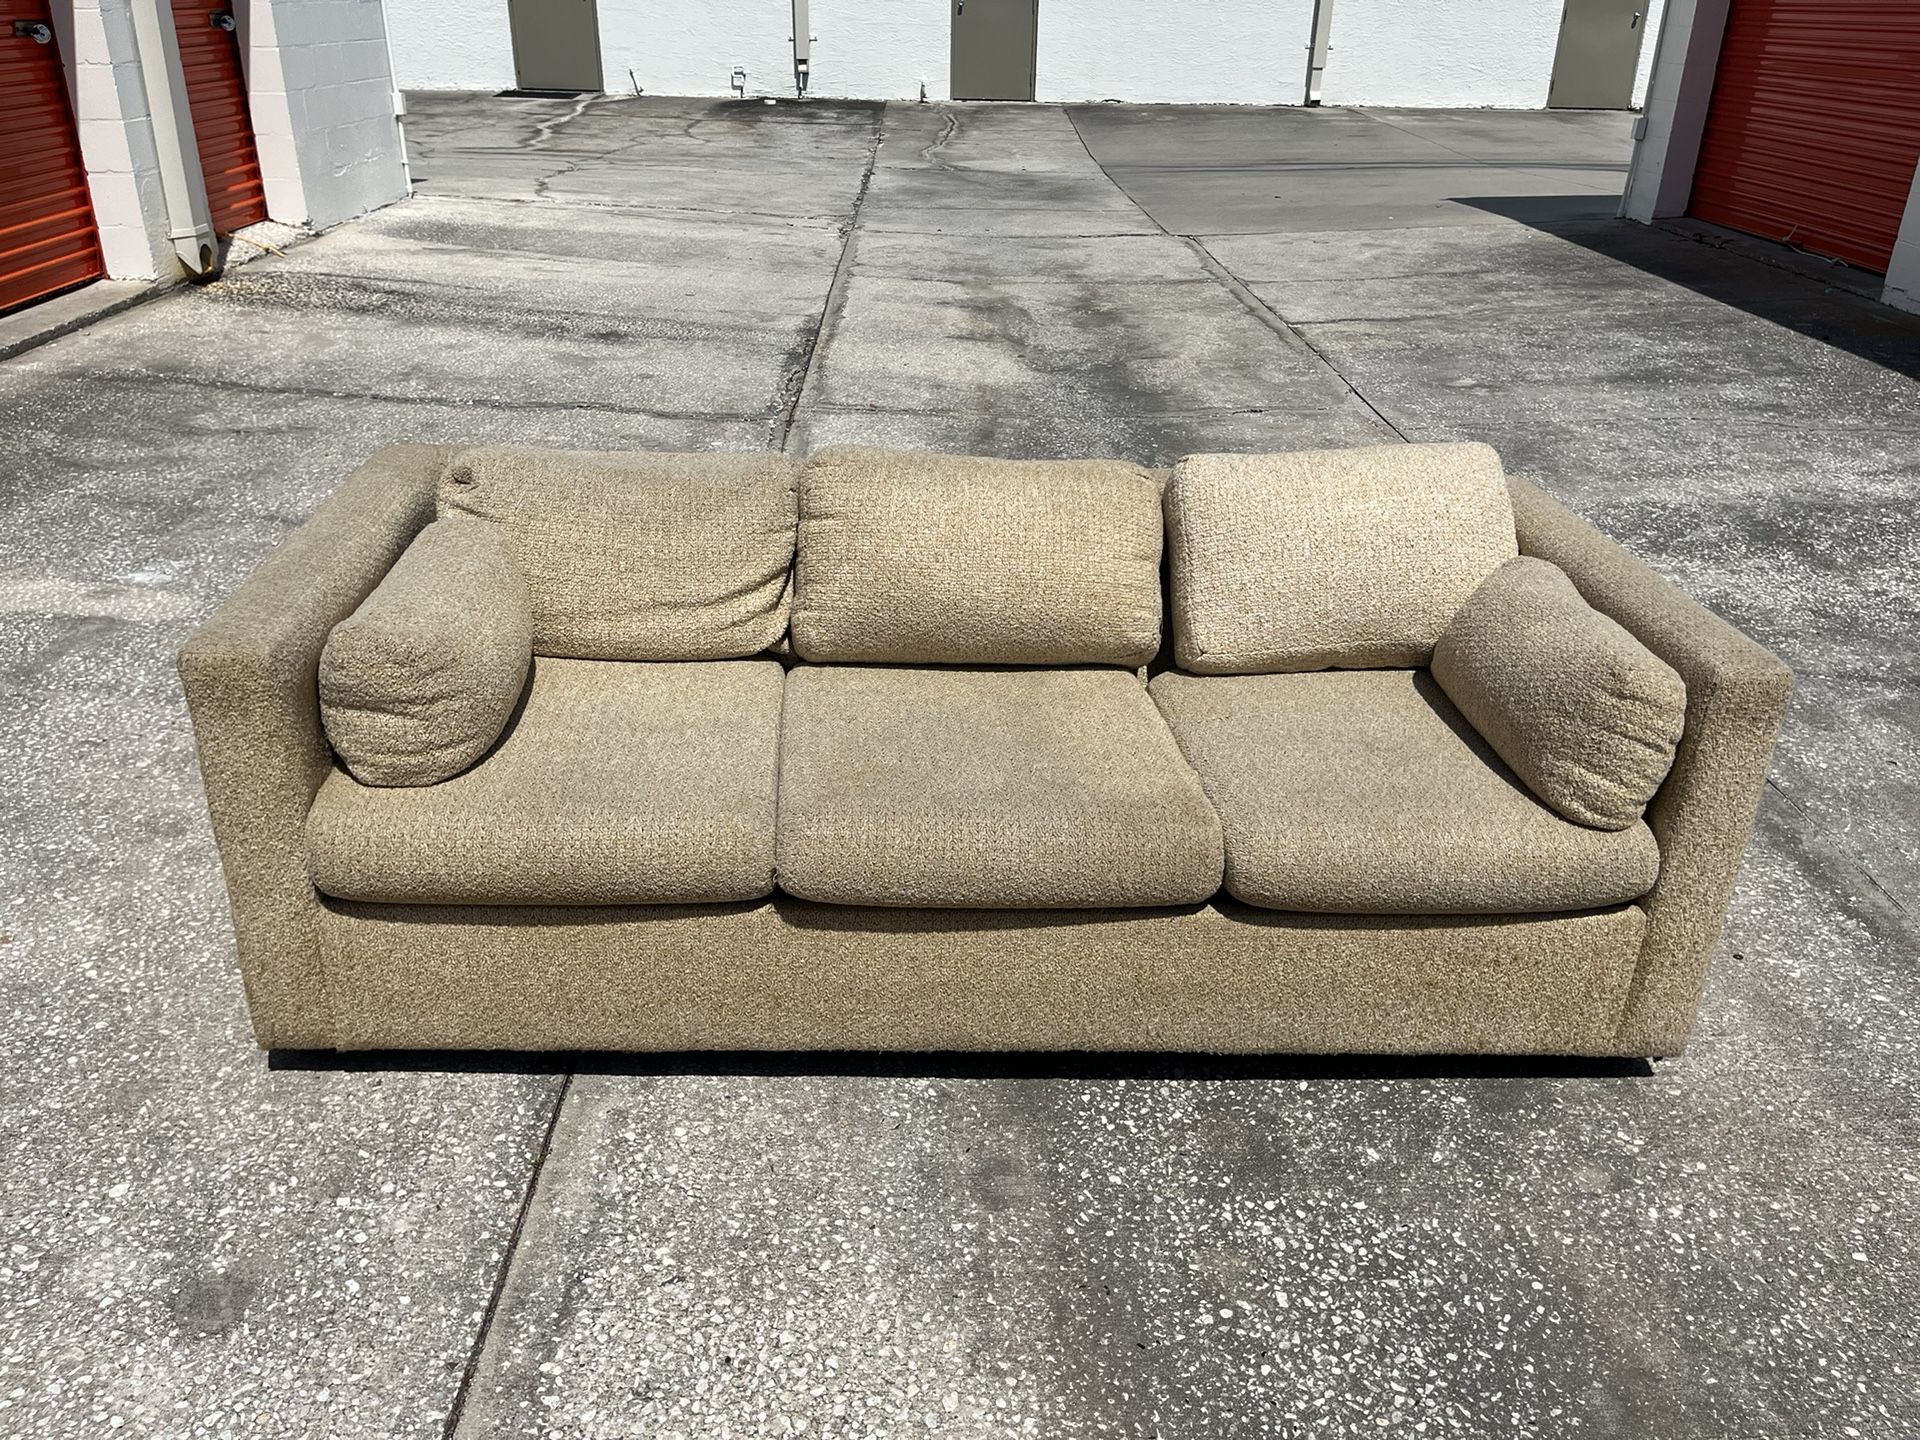 Beige/Wheat Couch - FREE DELIVERY 🚛